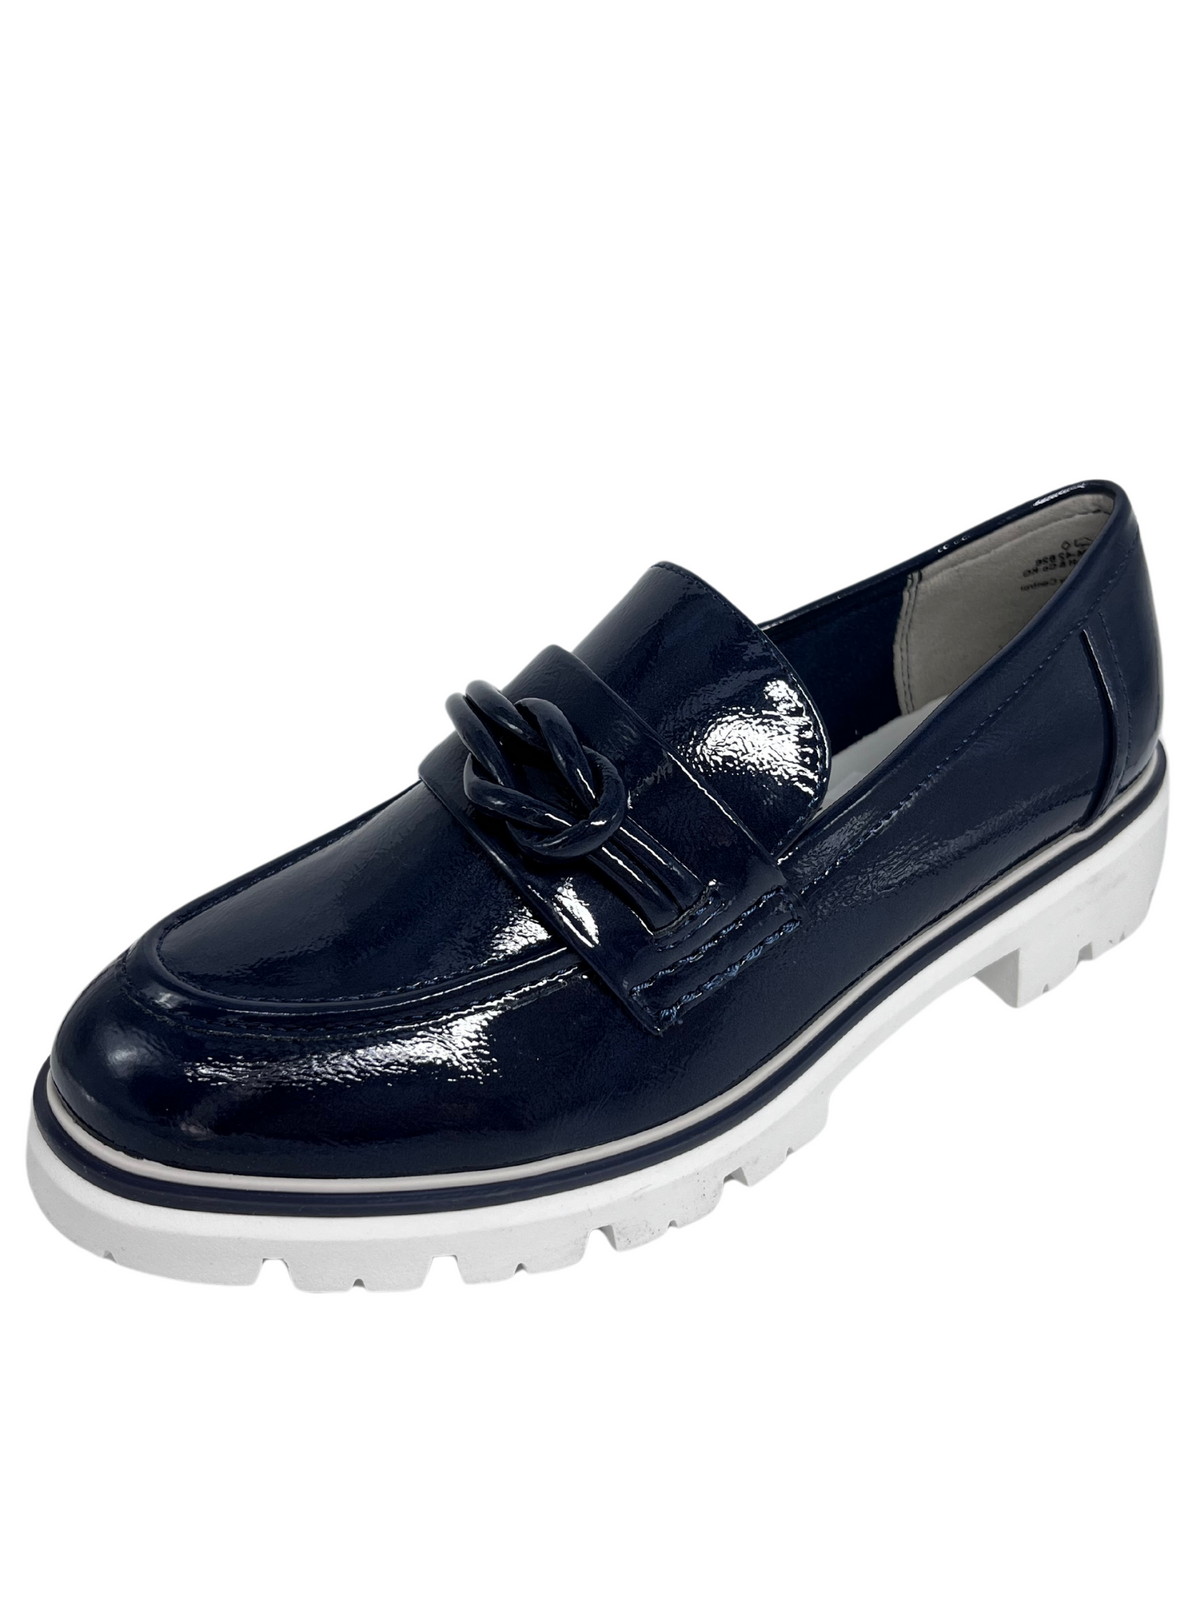 Marco Tozzi Navy Patent Loafer With Knot Design